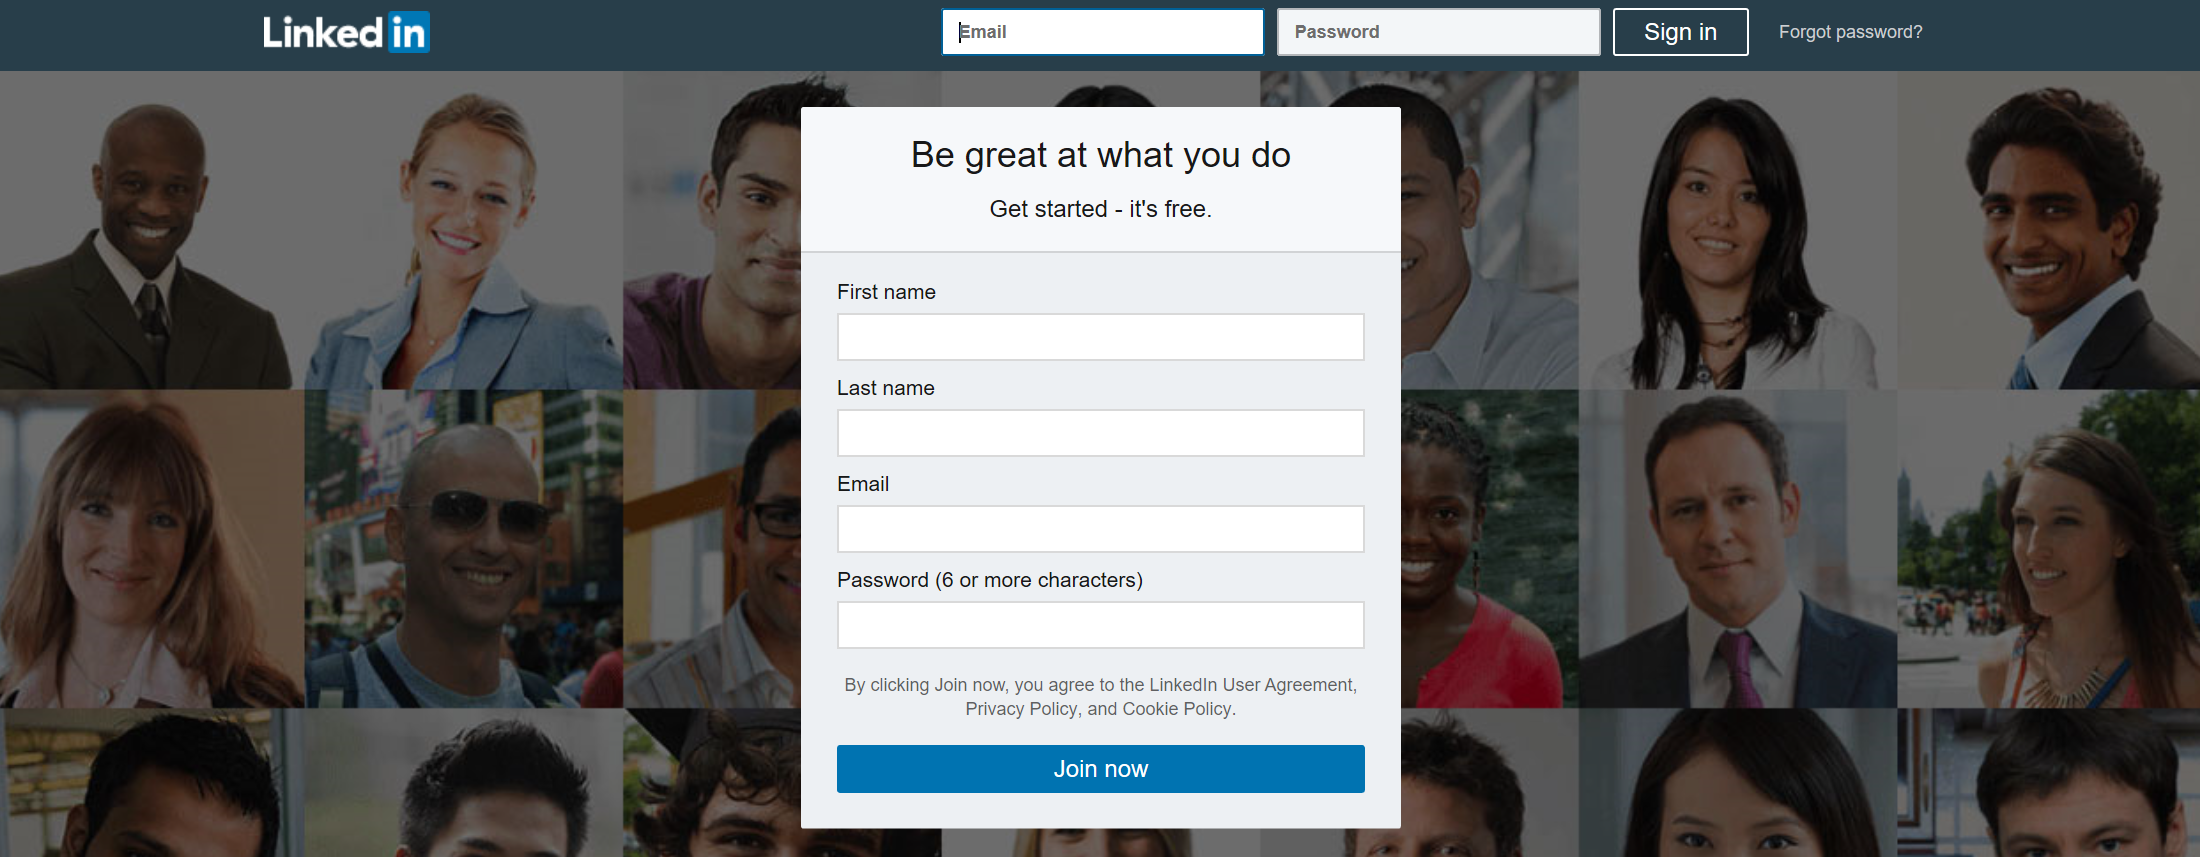 LinkedIn sign-in page